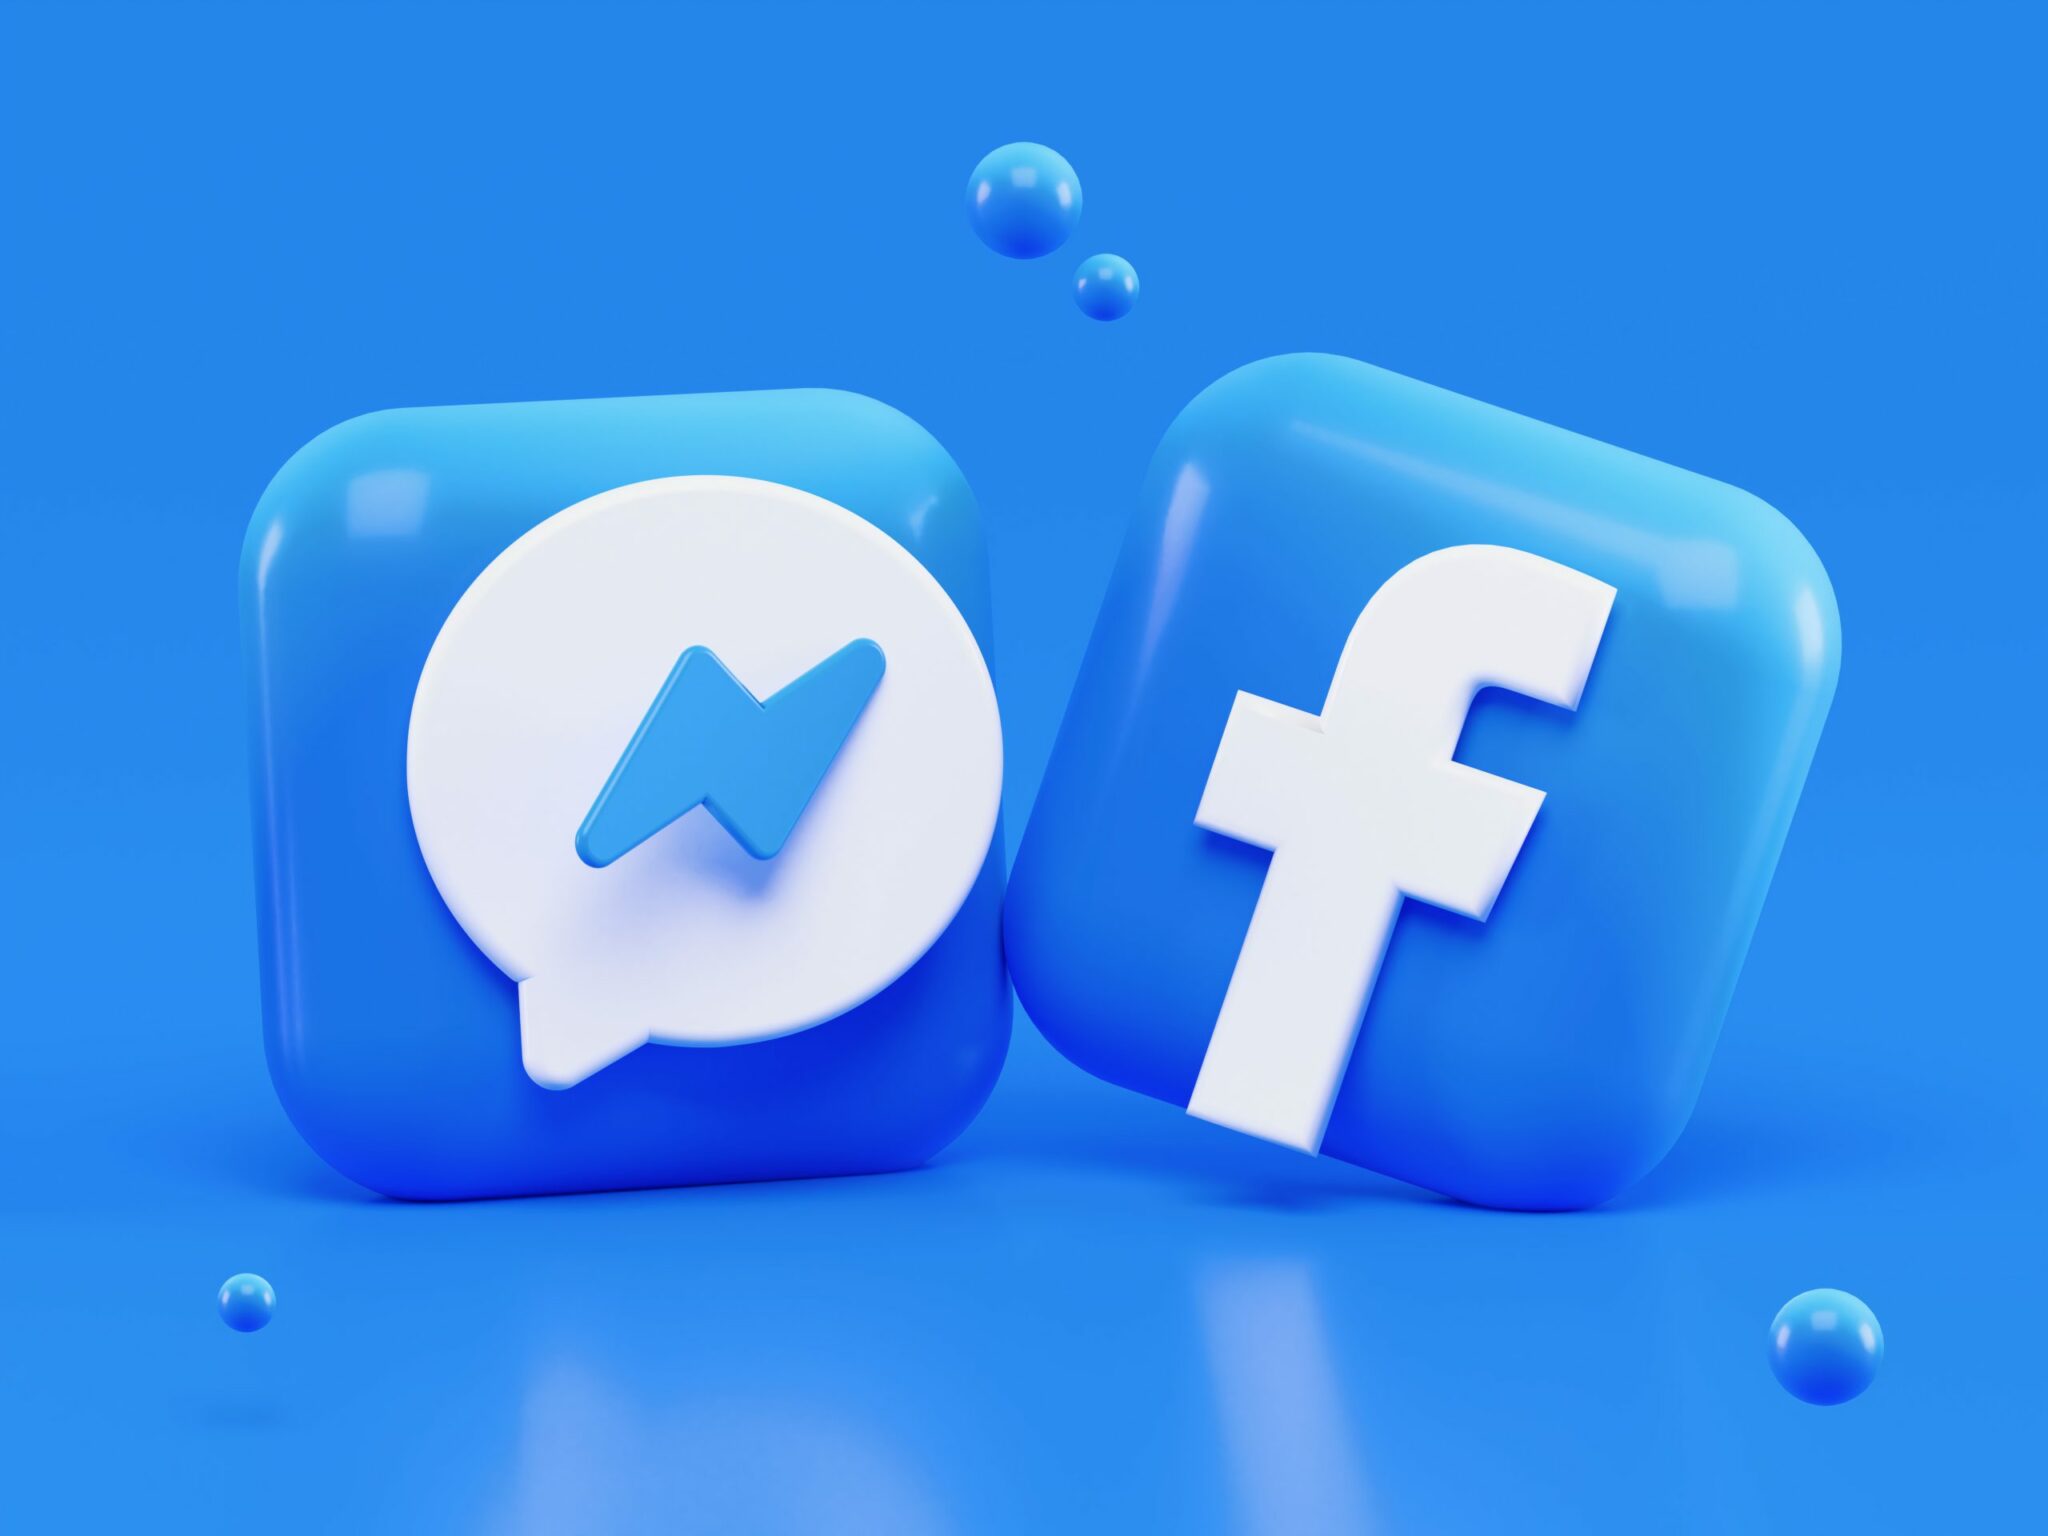 How to Fix Facebook Messenger Not Sending, Receiving or Loading Messages?